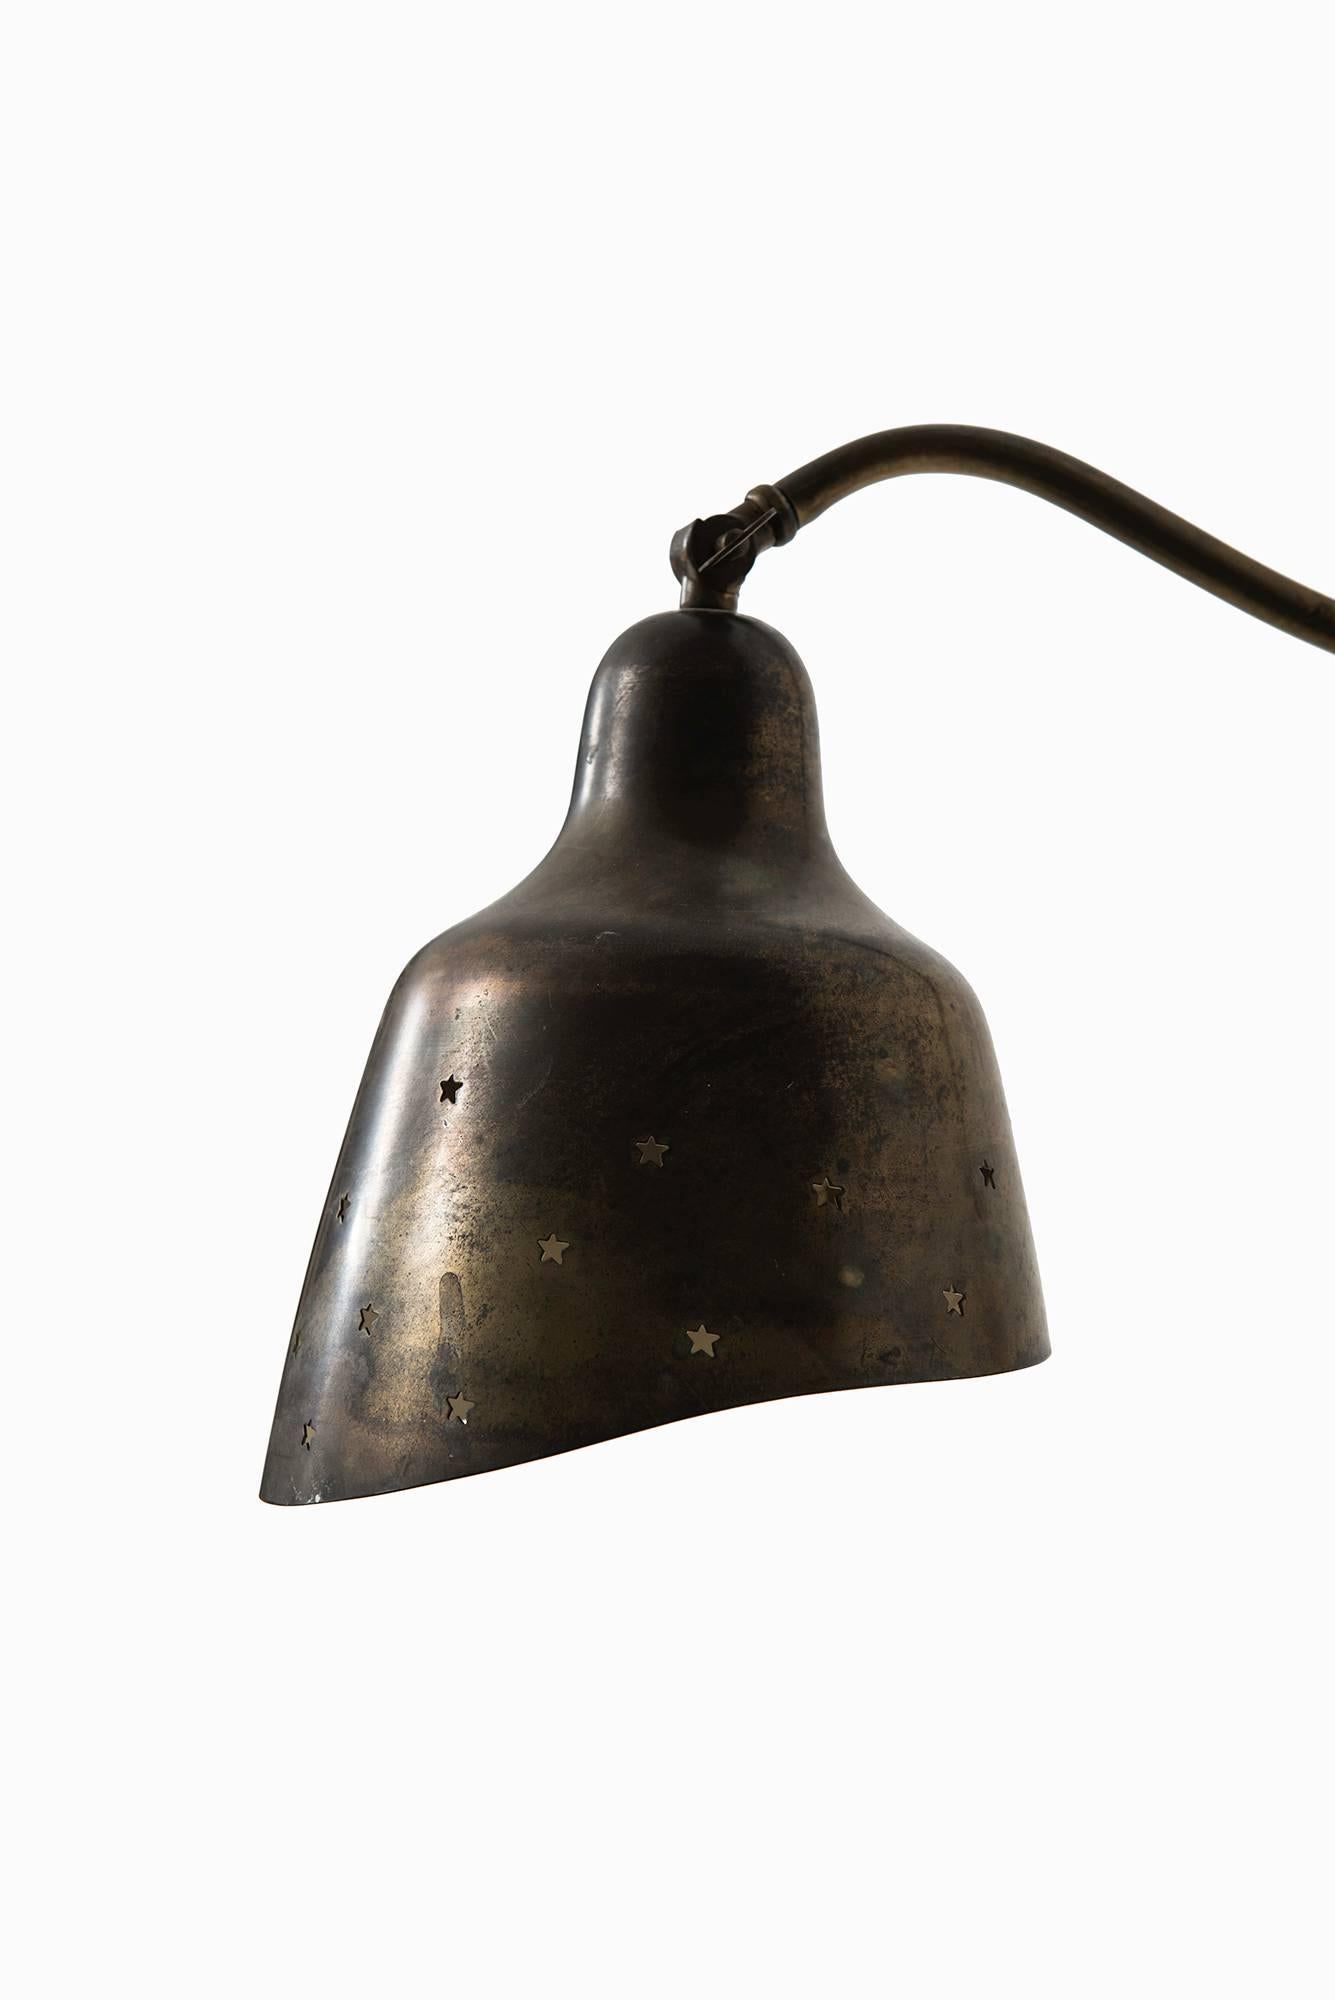 Rare wall lamp in the manner of Vilhelm Lauritzen. Produced in Denmark.